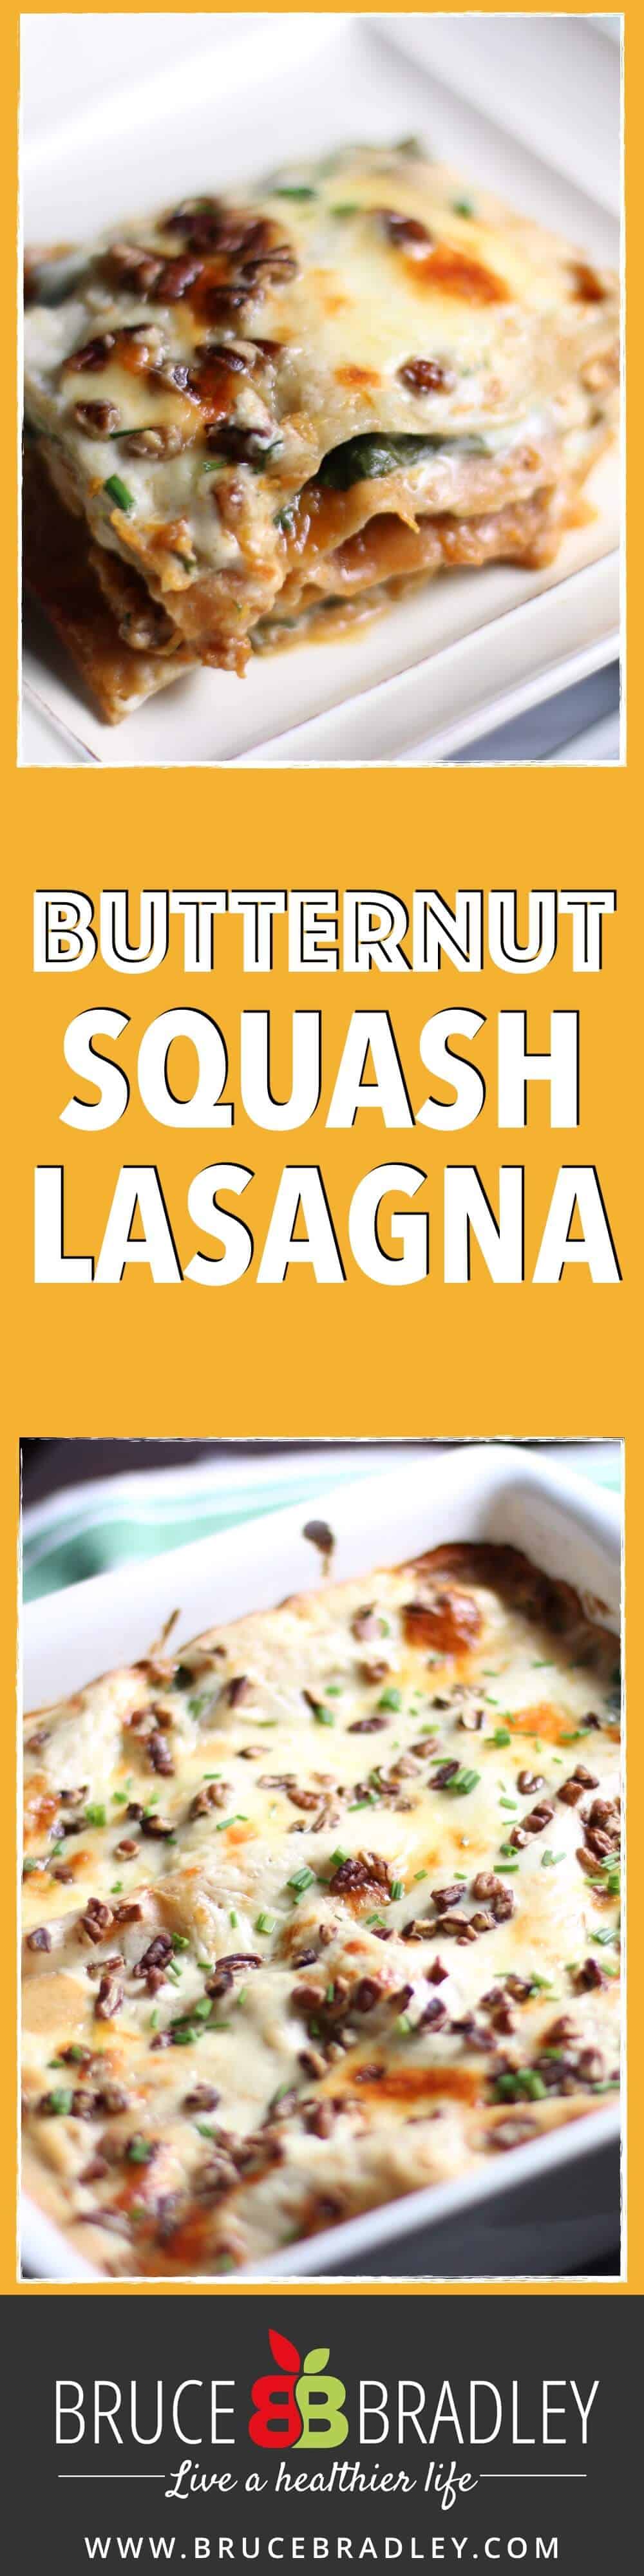 This Butternut Squash Lasagna Recipe Is A Delicious, Mouth-Watering Twist On Traditional Lasagna That'S Made With Butternut Squash, Spinach, And Swiss Cheese!